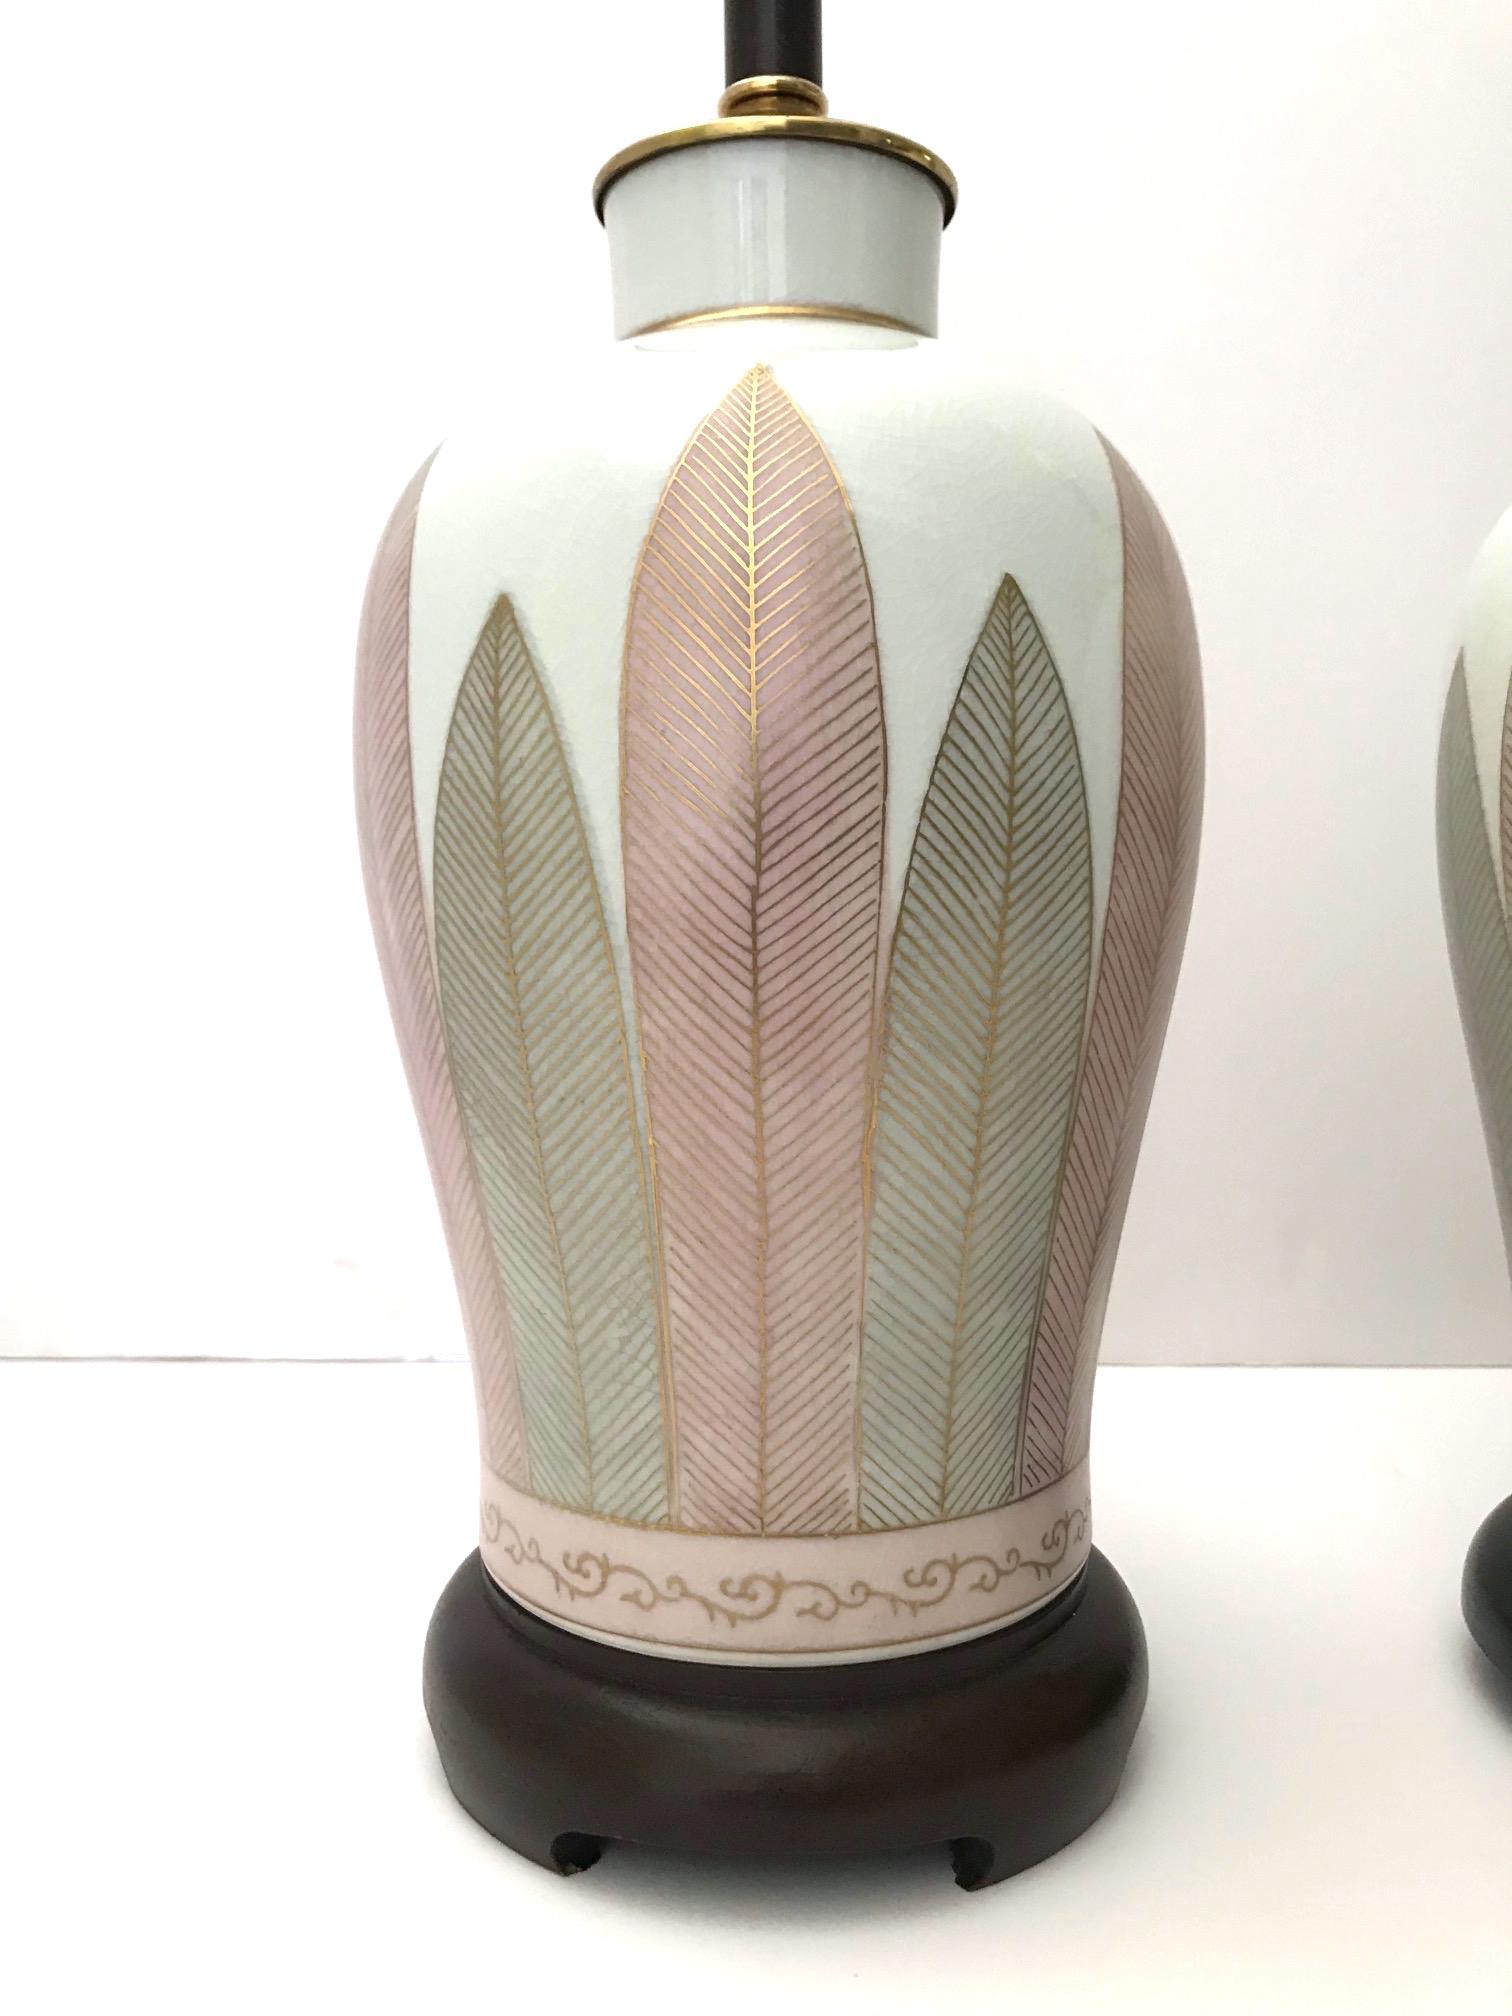 Pair of Japanese Hand Painted Porcelain Lamps in White, Grey, and Pink, C. 1970s For Sale 2